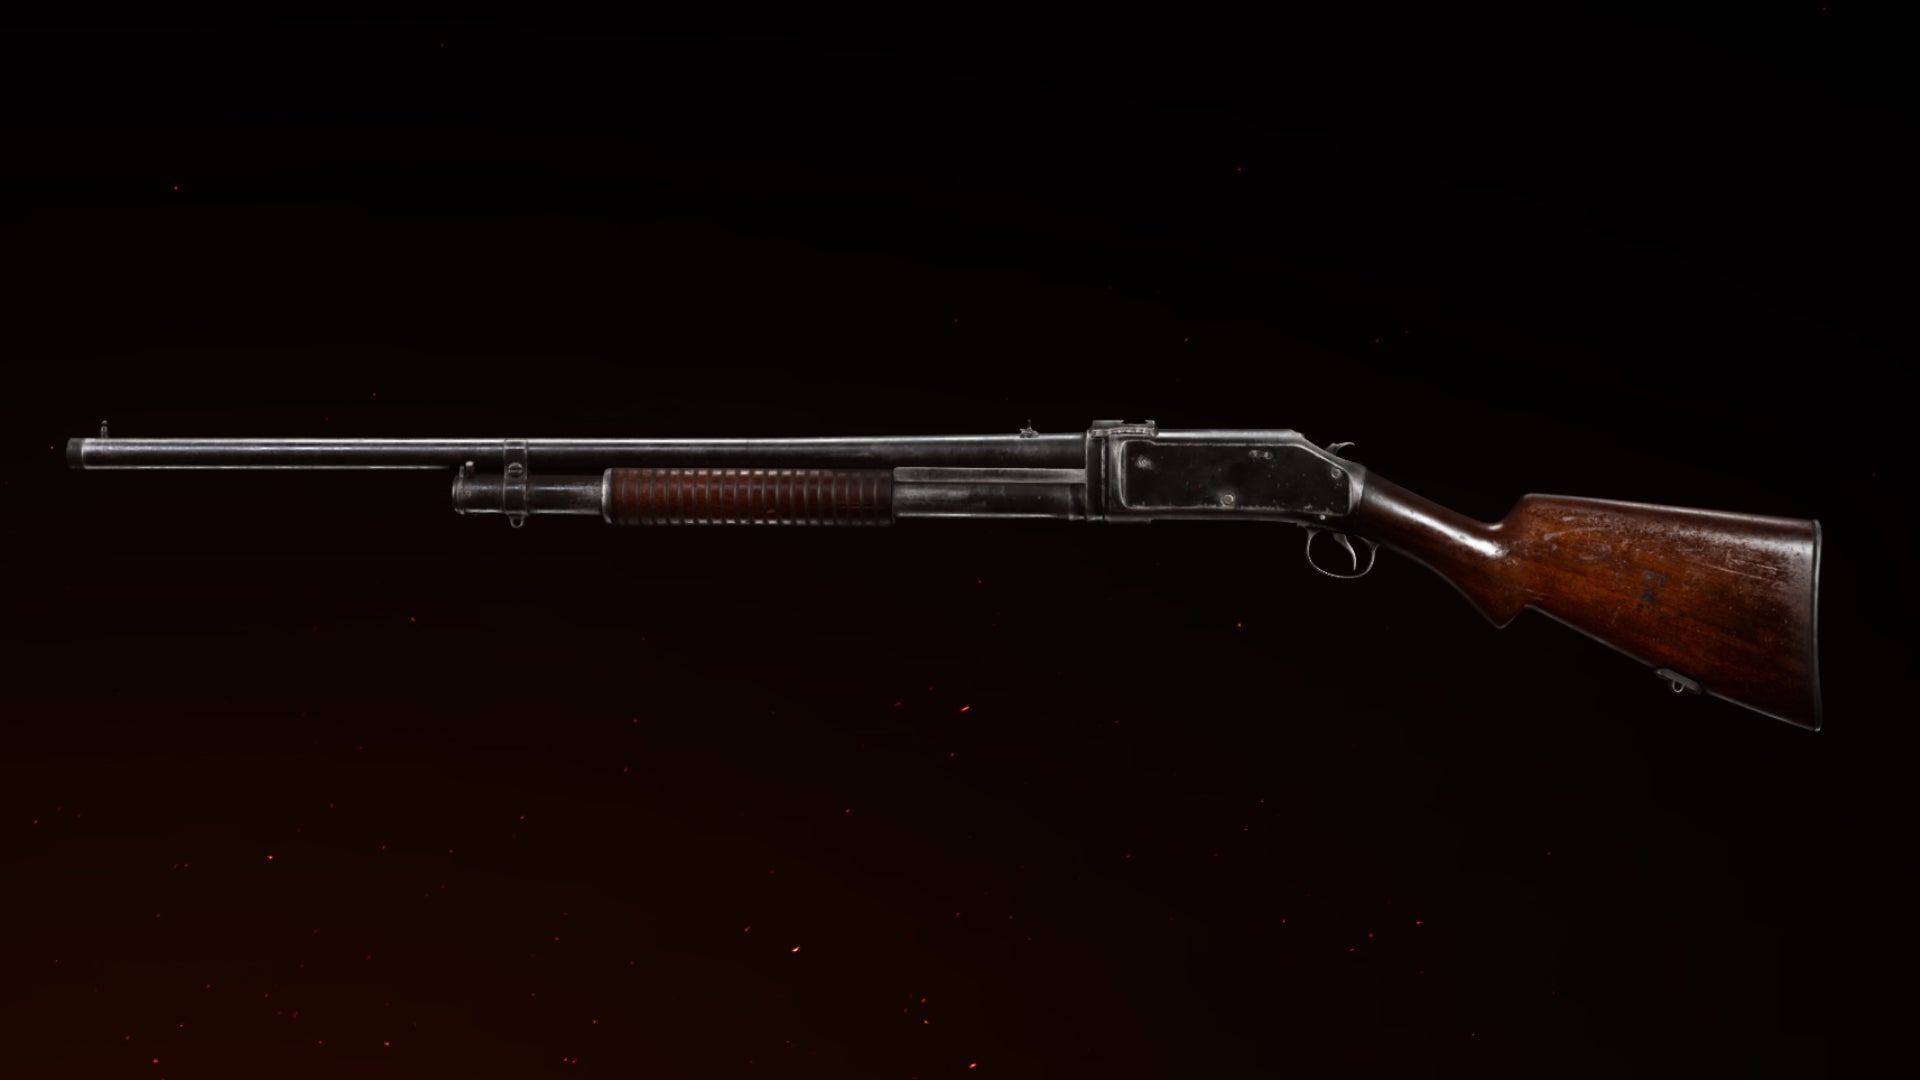 A render of the Gracey Auto Shotgun in Call Of Duty: Vanguard.